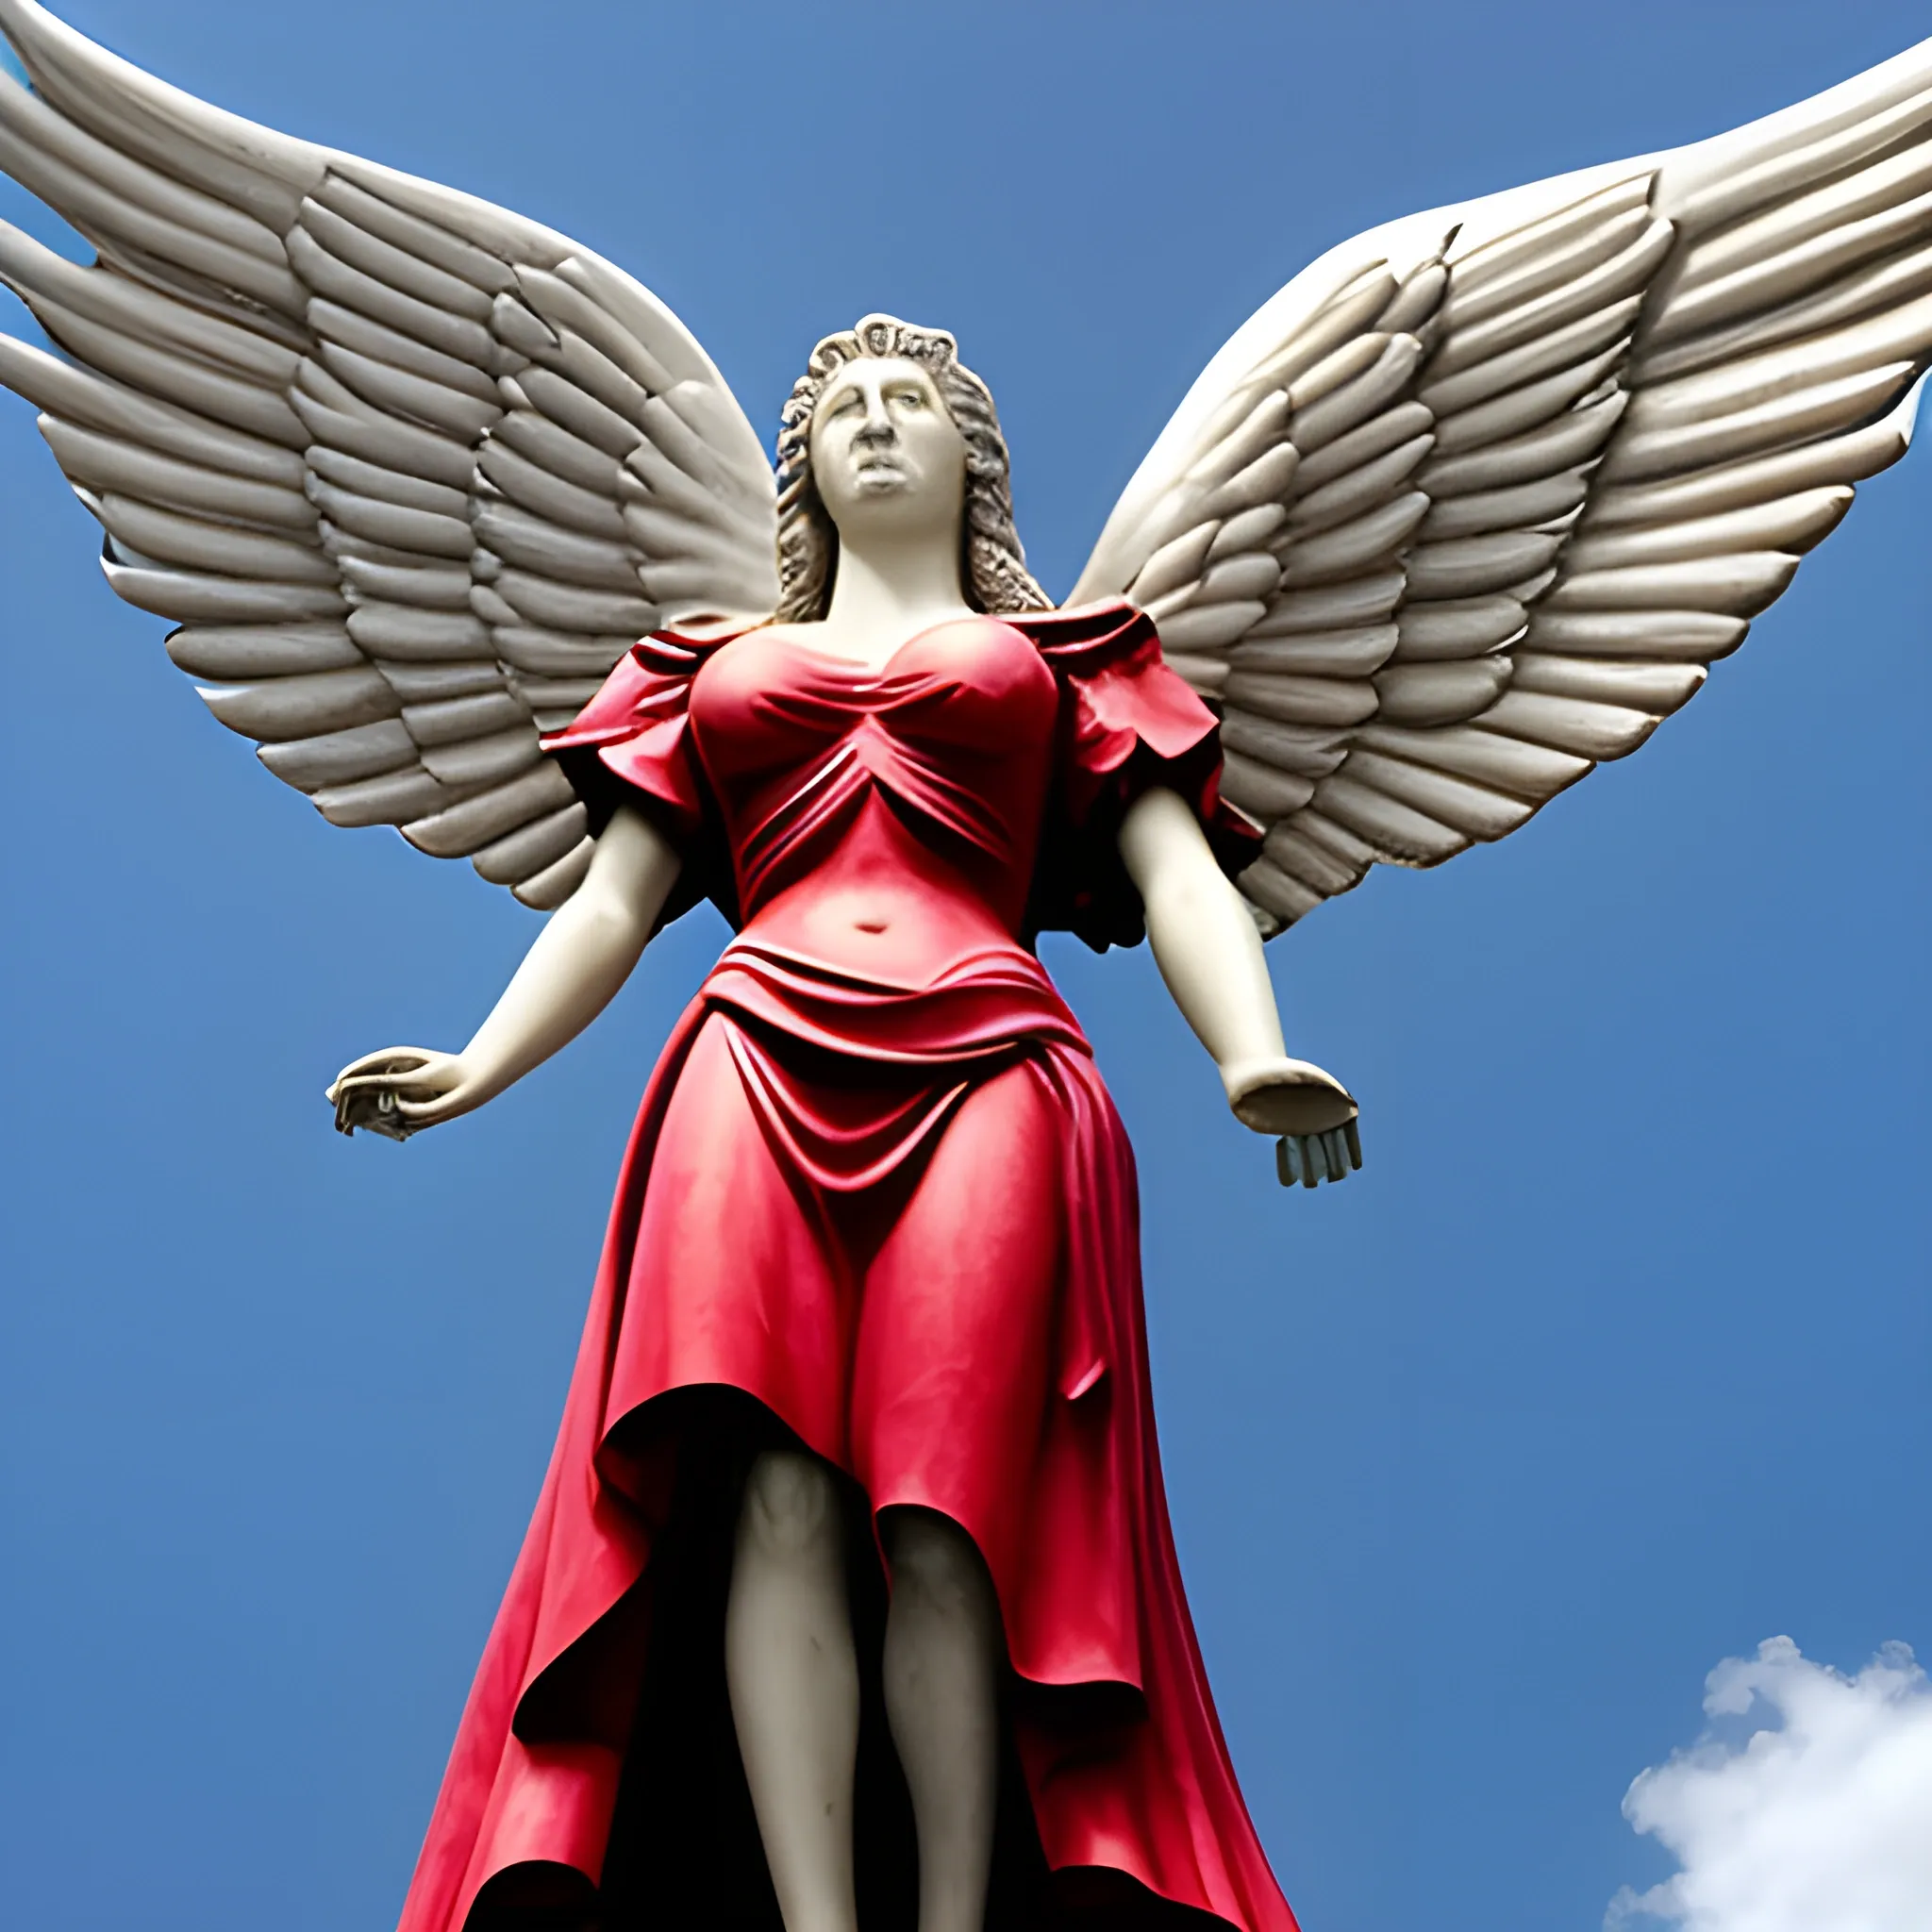 the angel of independence in mexico city with a red heart in her chest